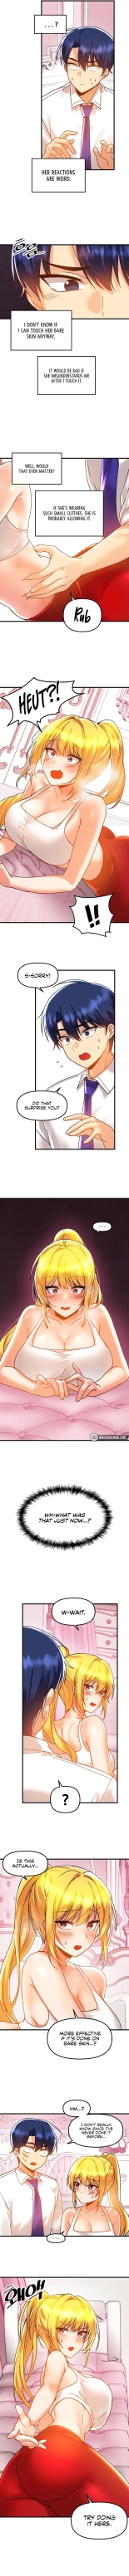 Trapped in the Academy's Eroge : página 386